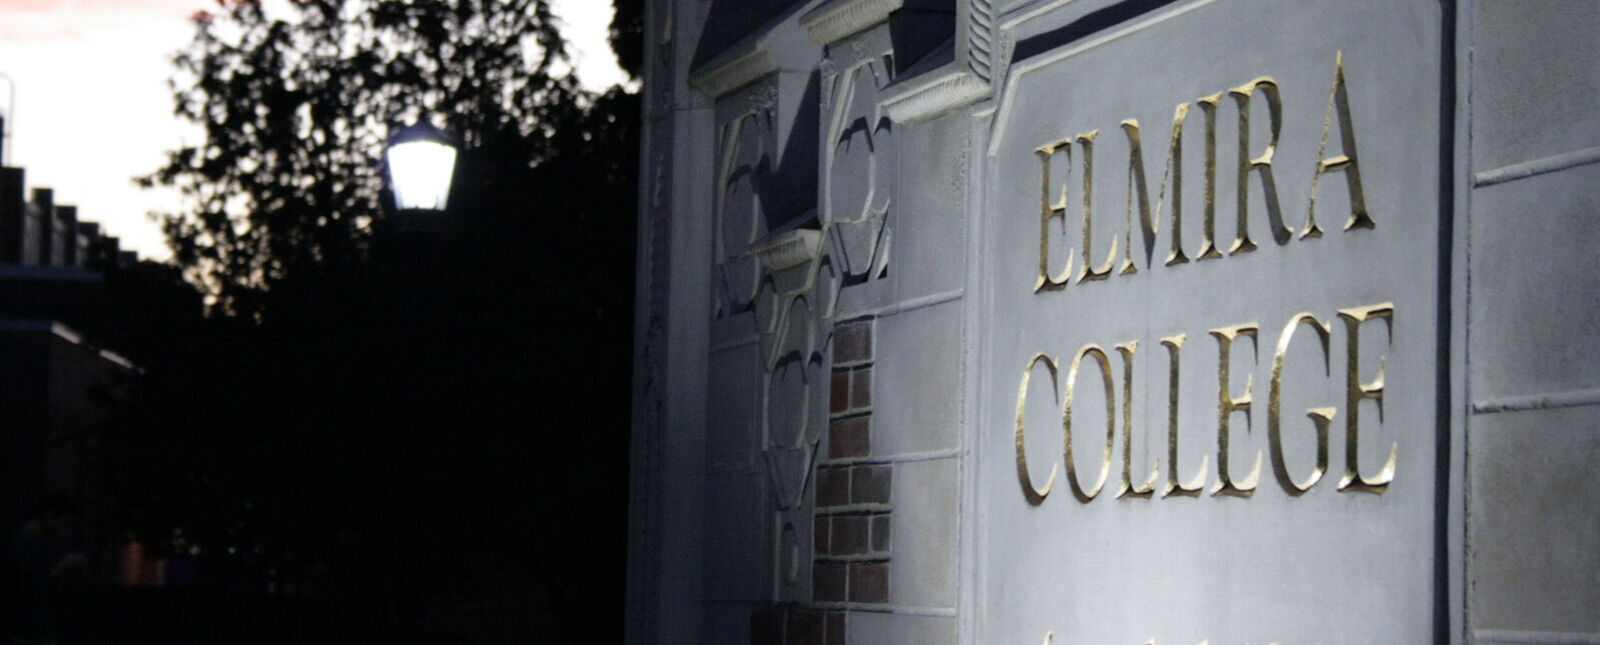 A stone Elmira College sign is lit up by spotlights during dusk